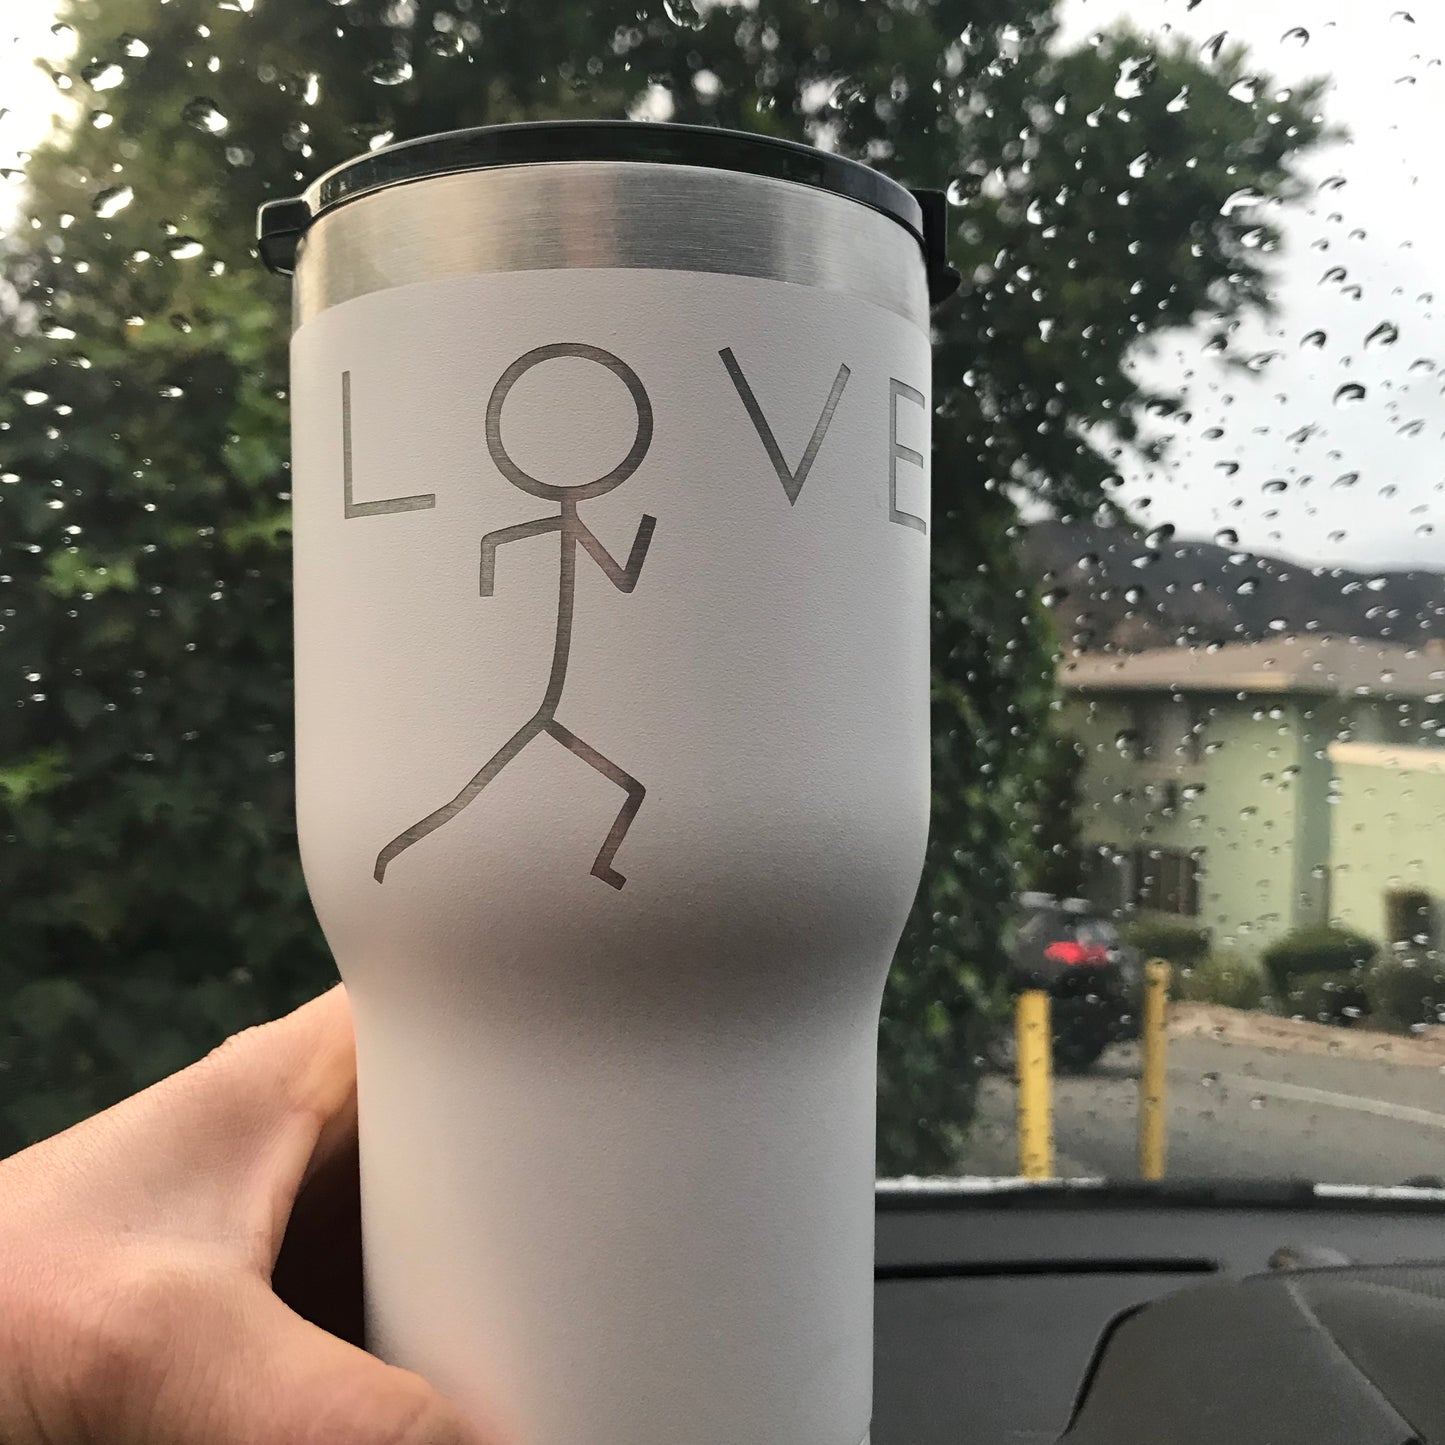 Coffee mug engraved with love design. the O in the word love is the head of a running stick figure. The background is a tree and some rain droplets on the windshield of the car.